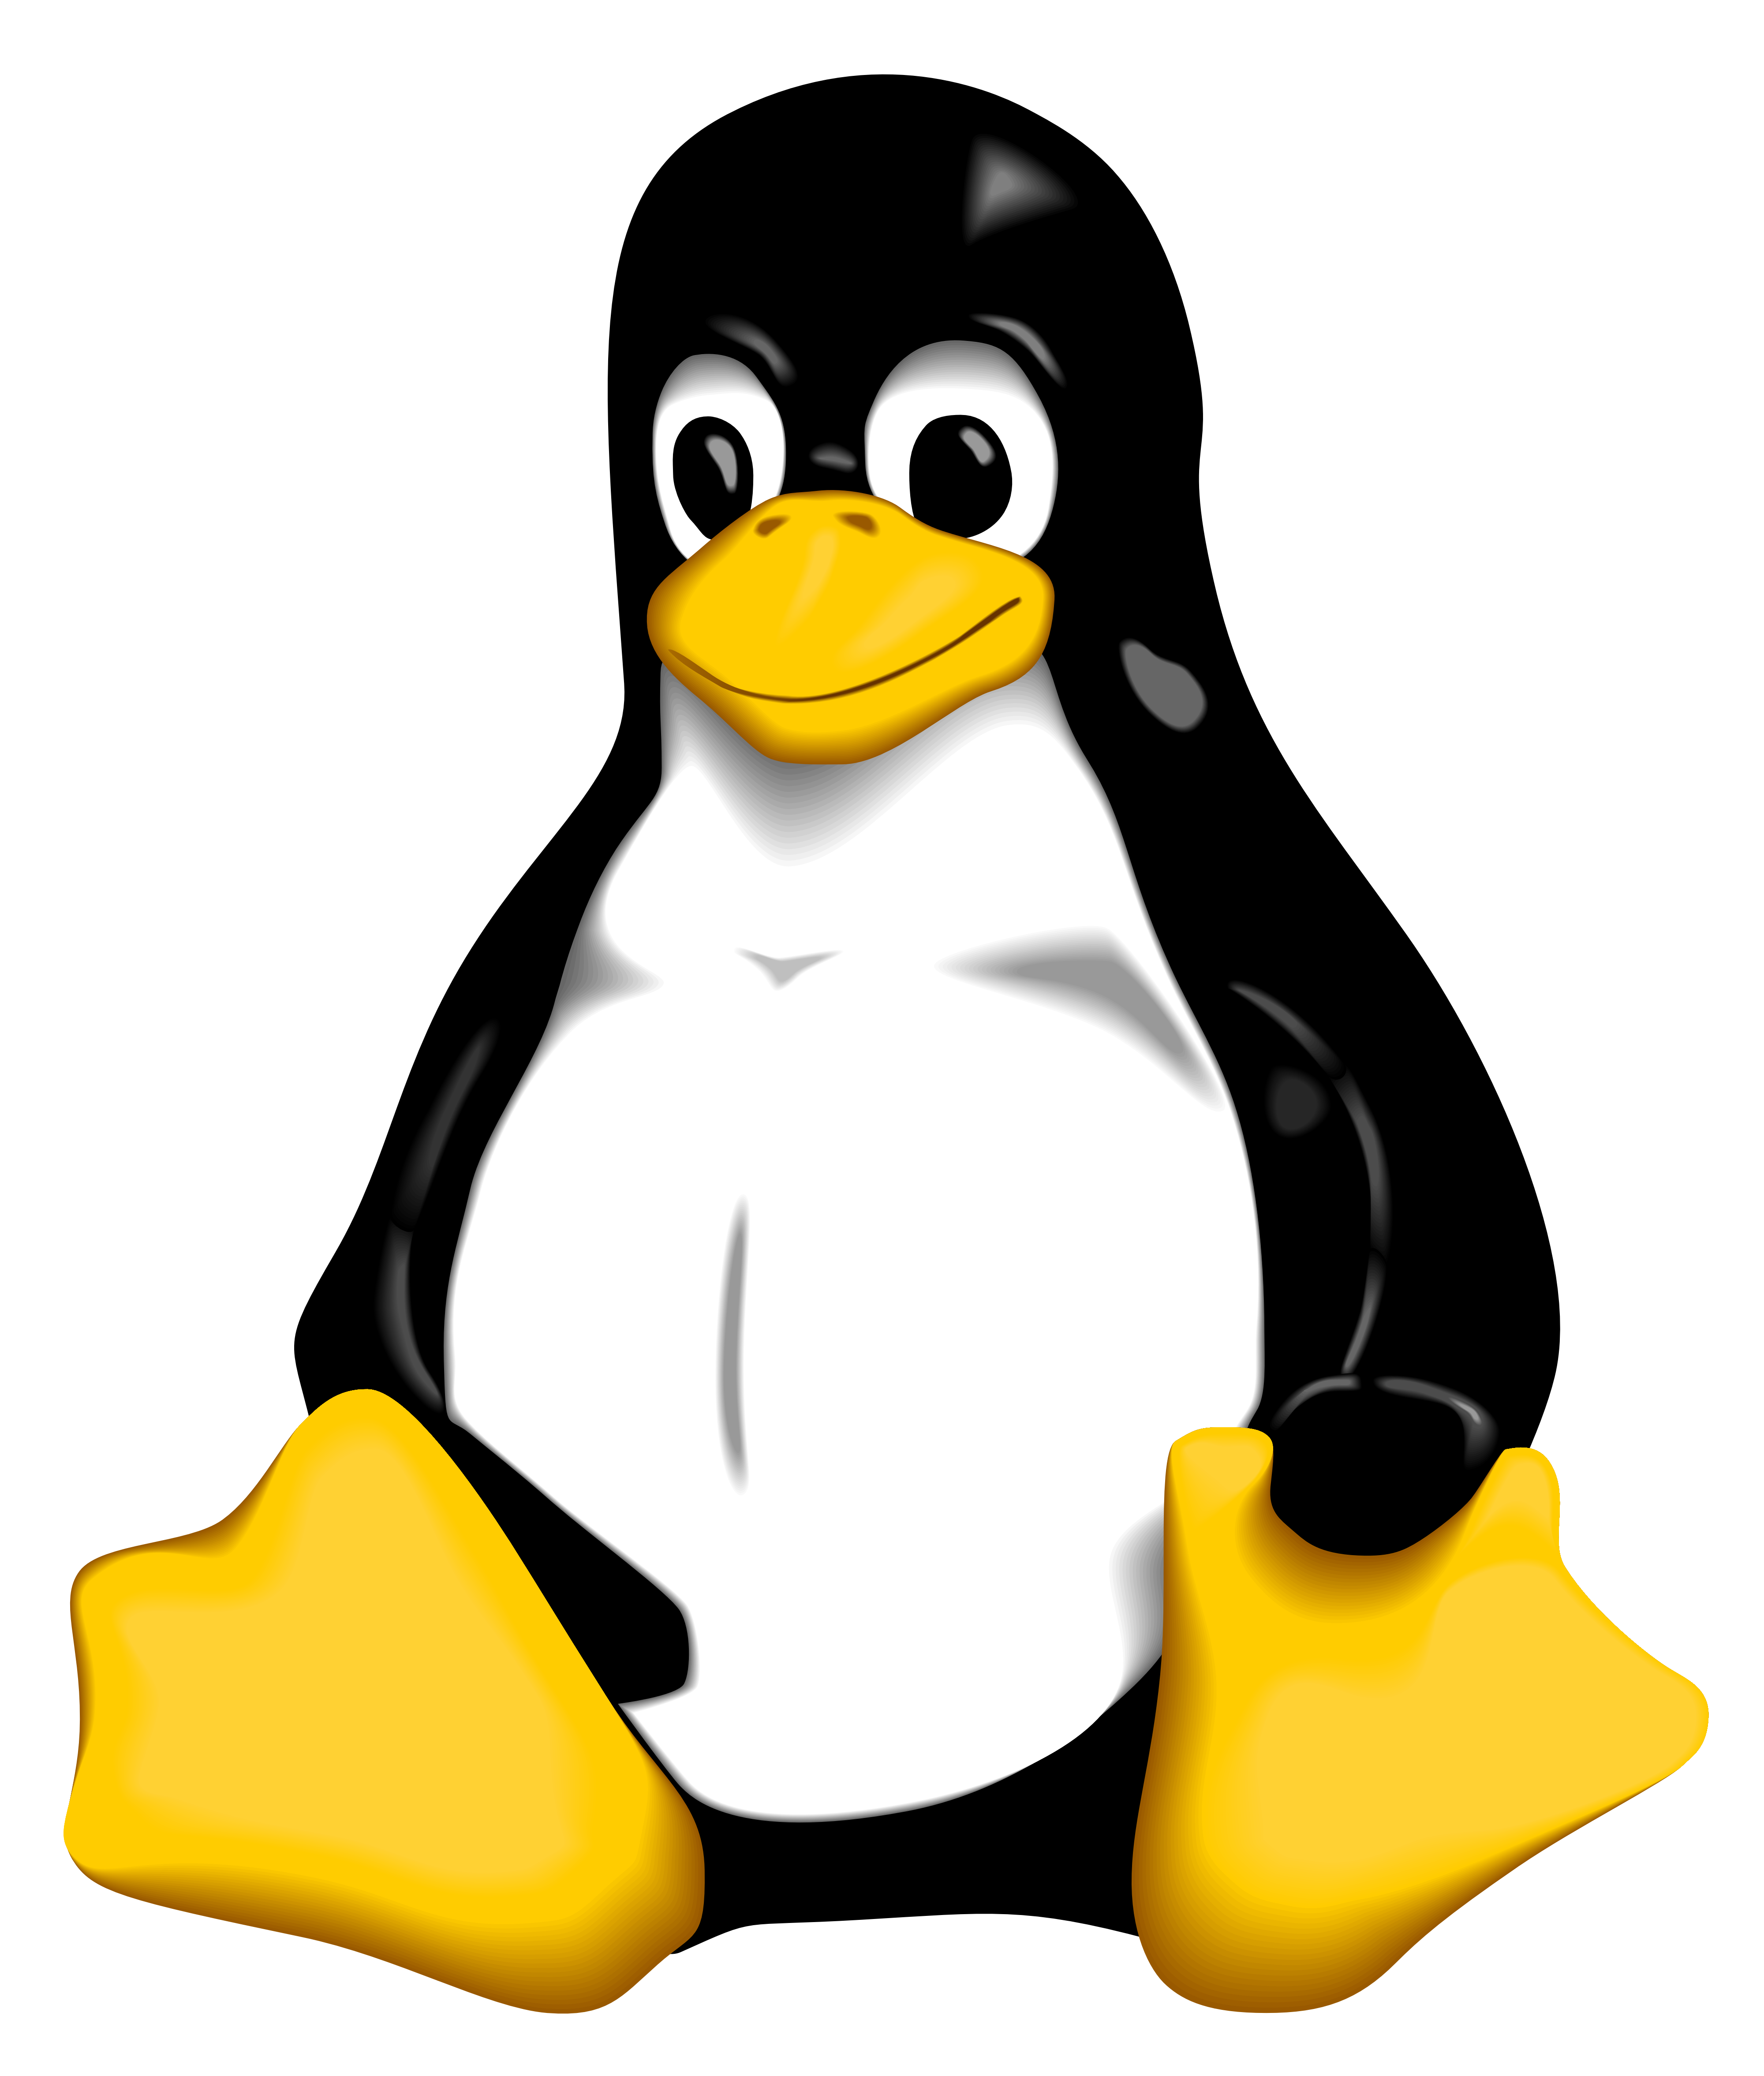 tux_giant.png 